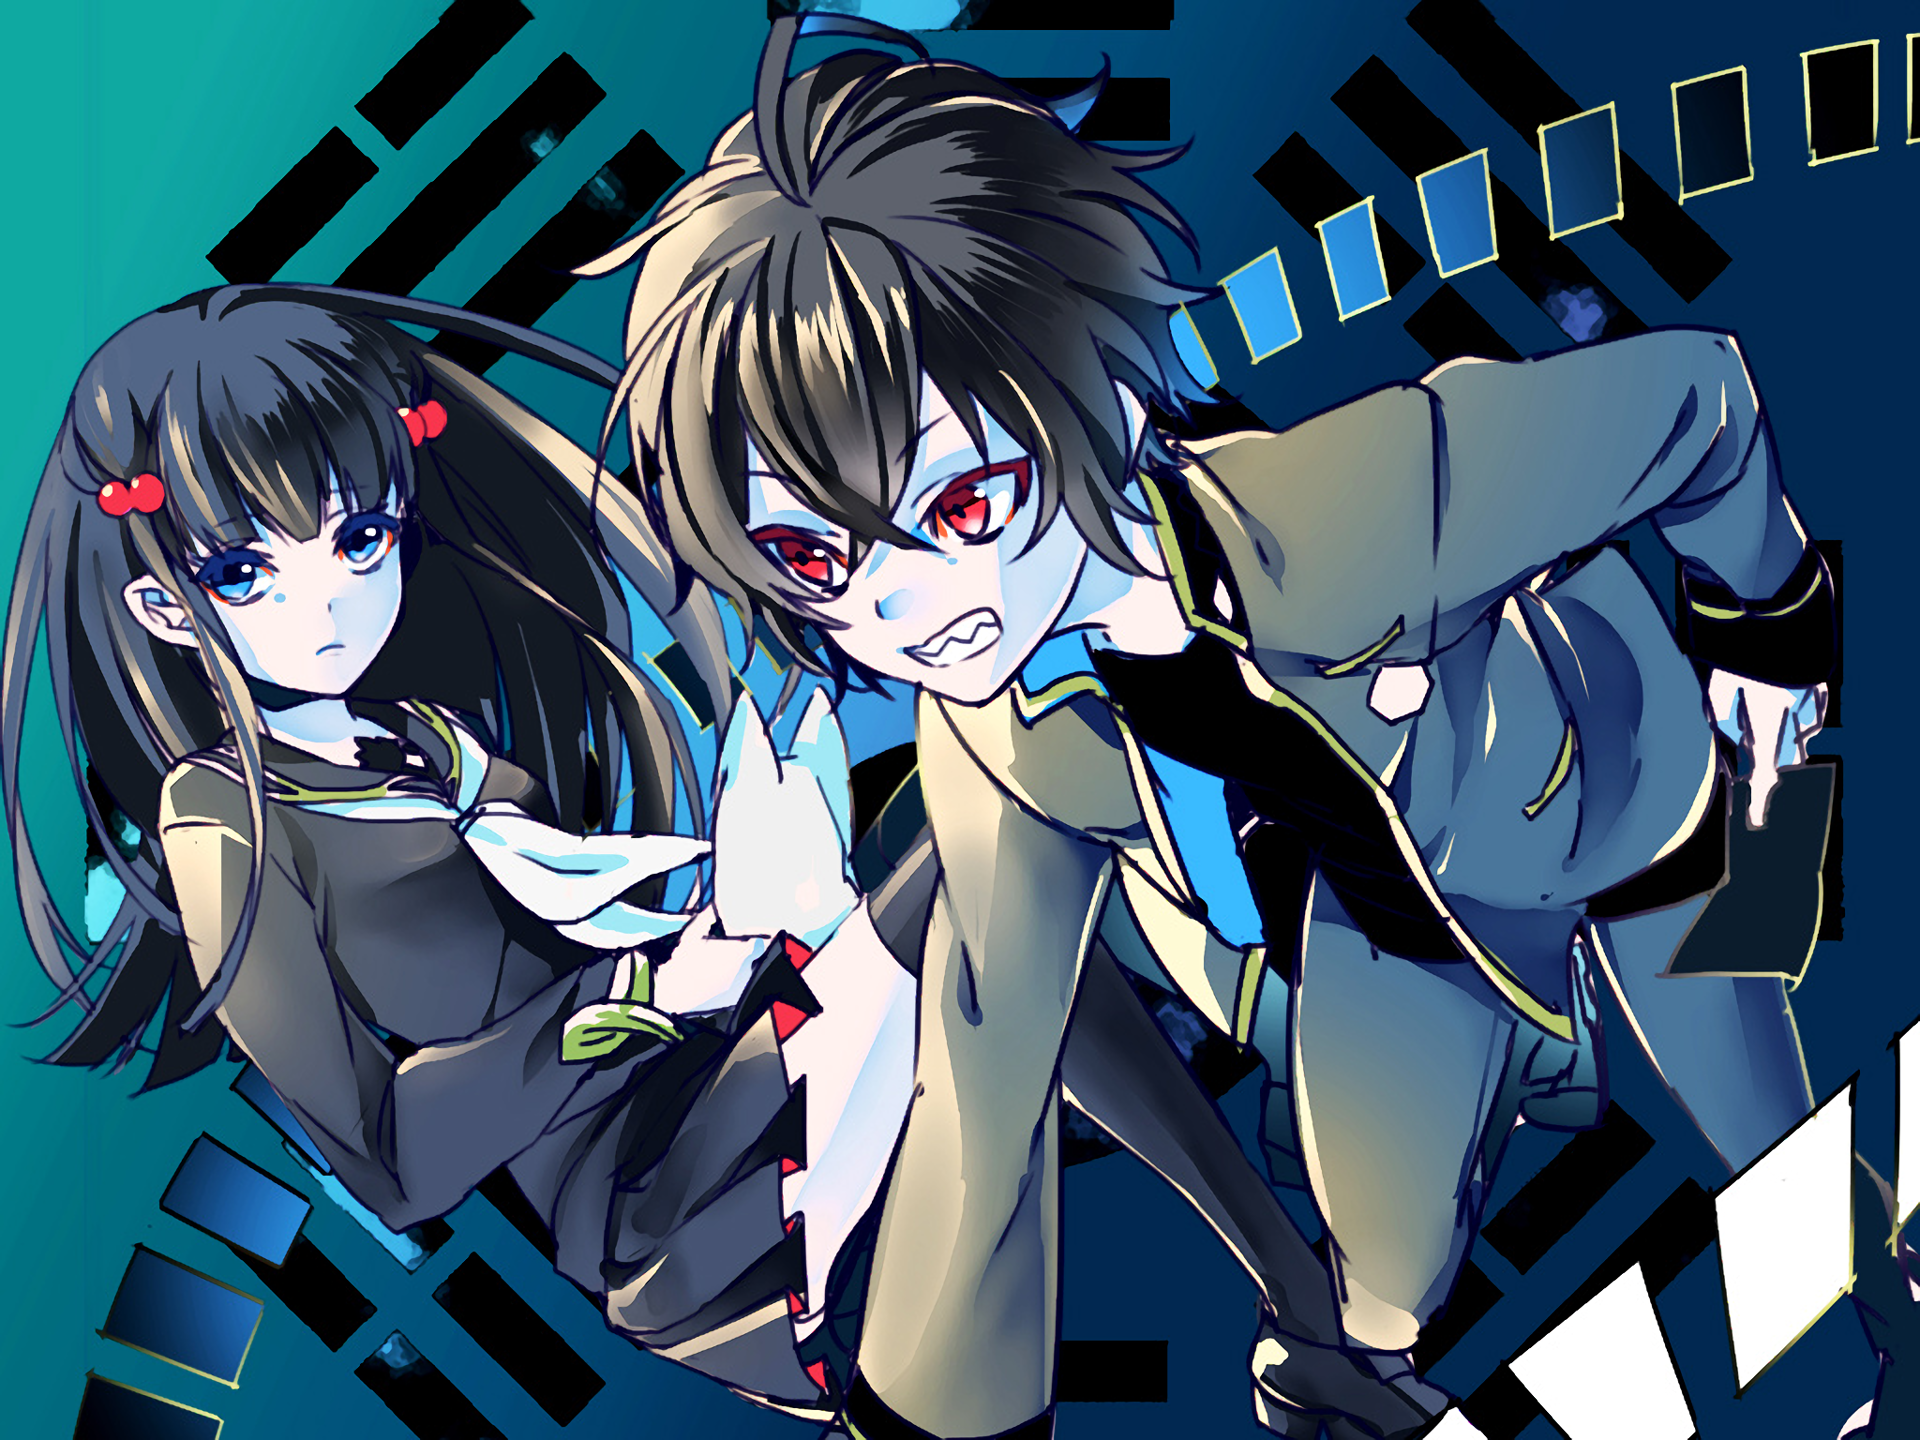 Anime Twin Star Exorcists HD Wallpaper | Background Image